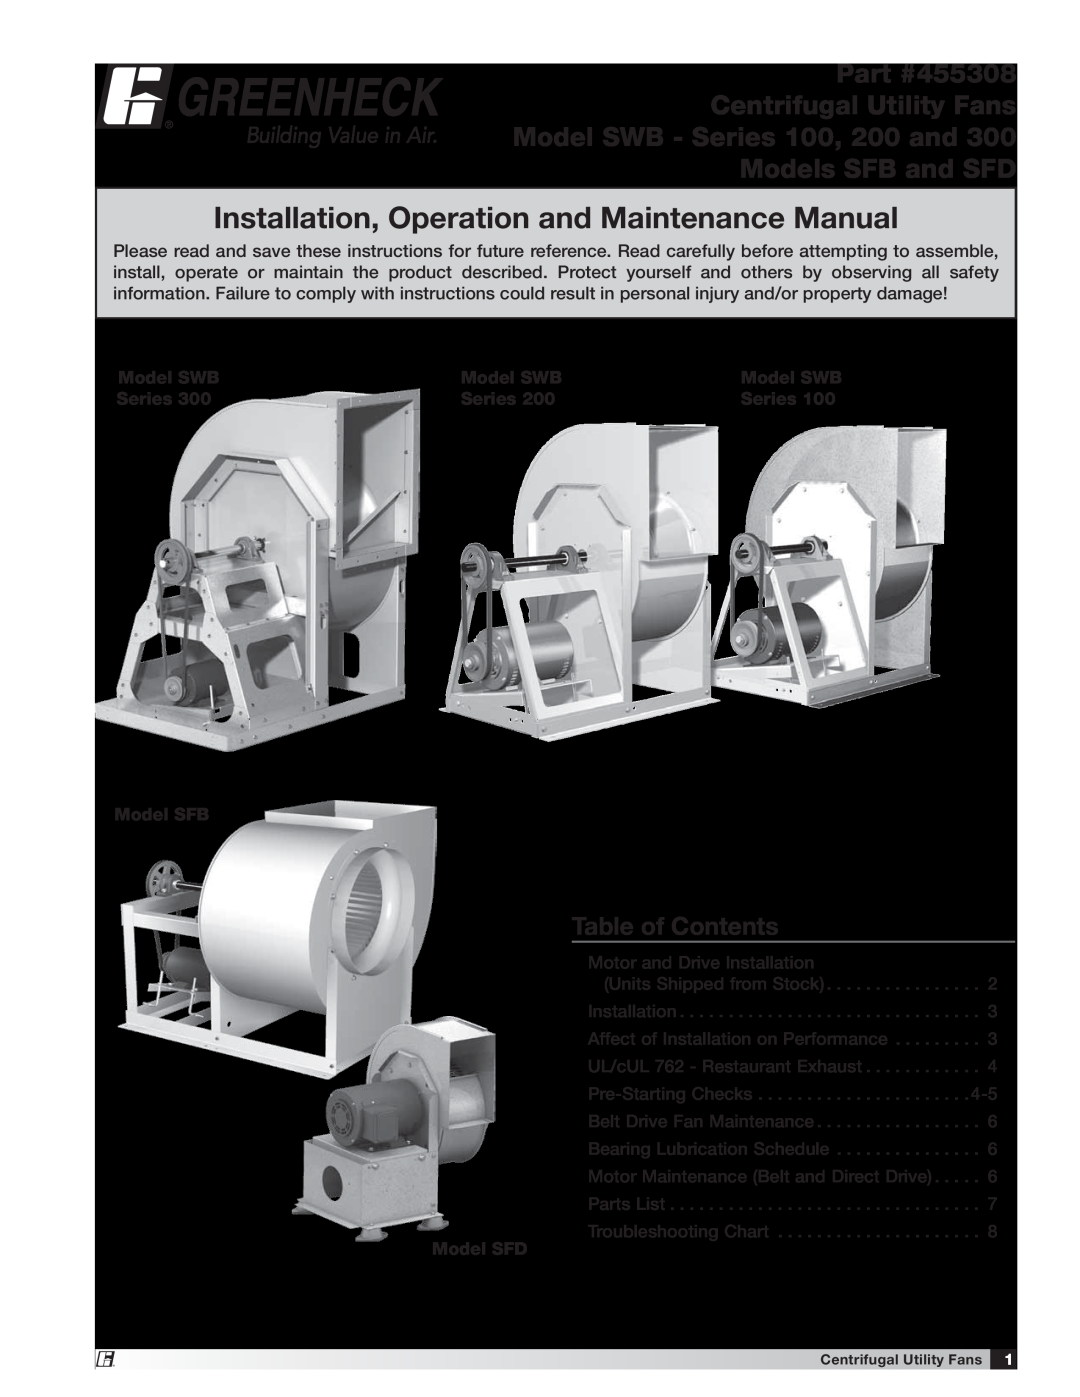 Greenheck Fan Model SWB Series 100 manual Installation, Operation and Maintenance Manual, Table of Contents, Model SFB 